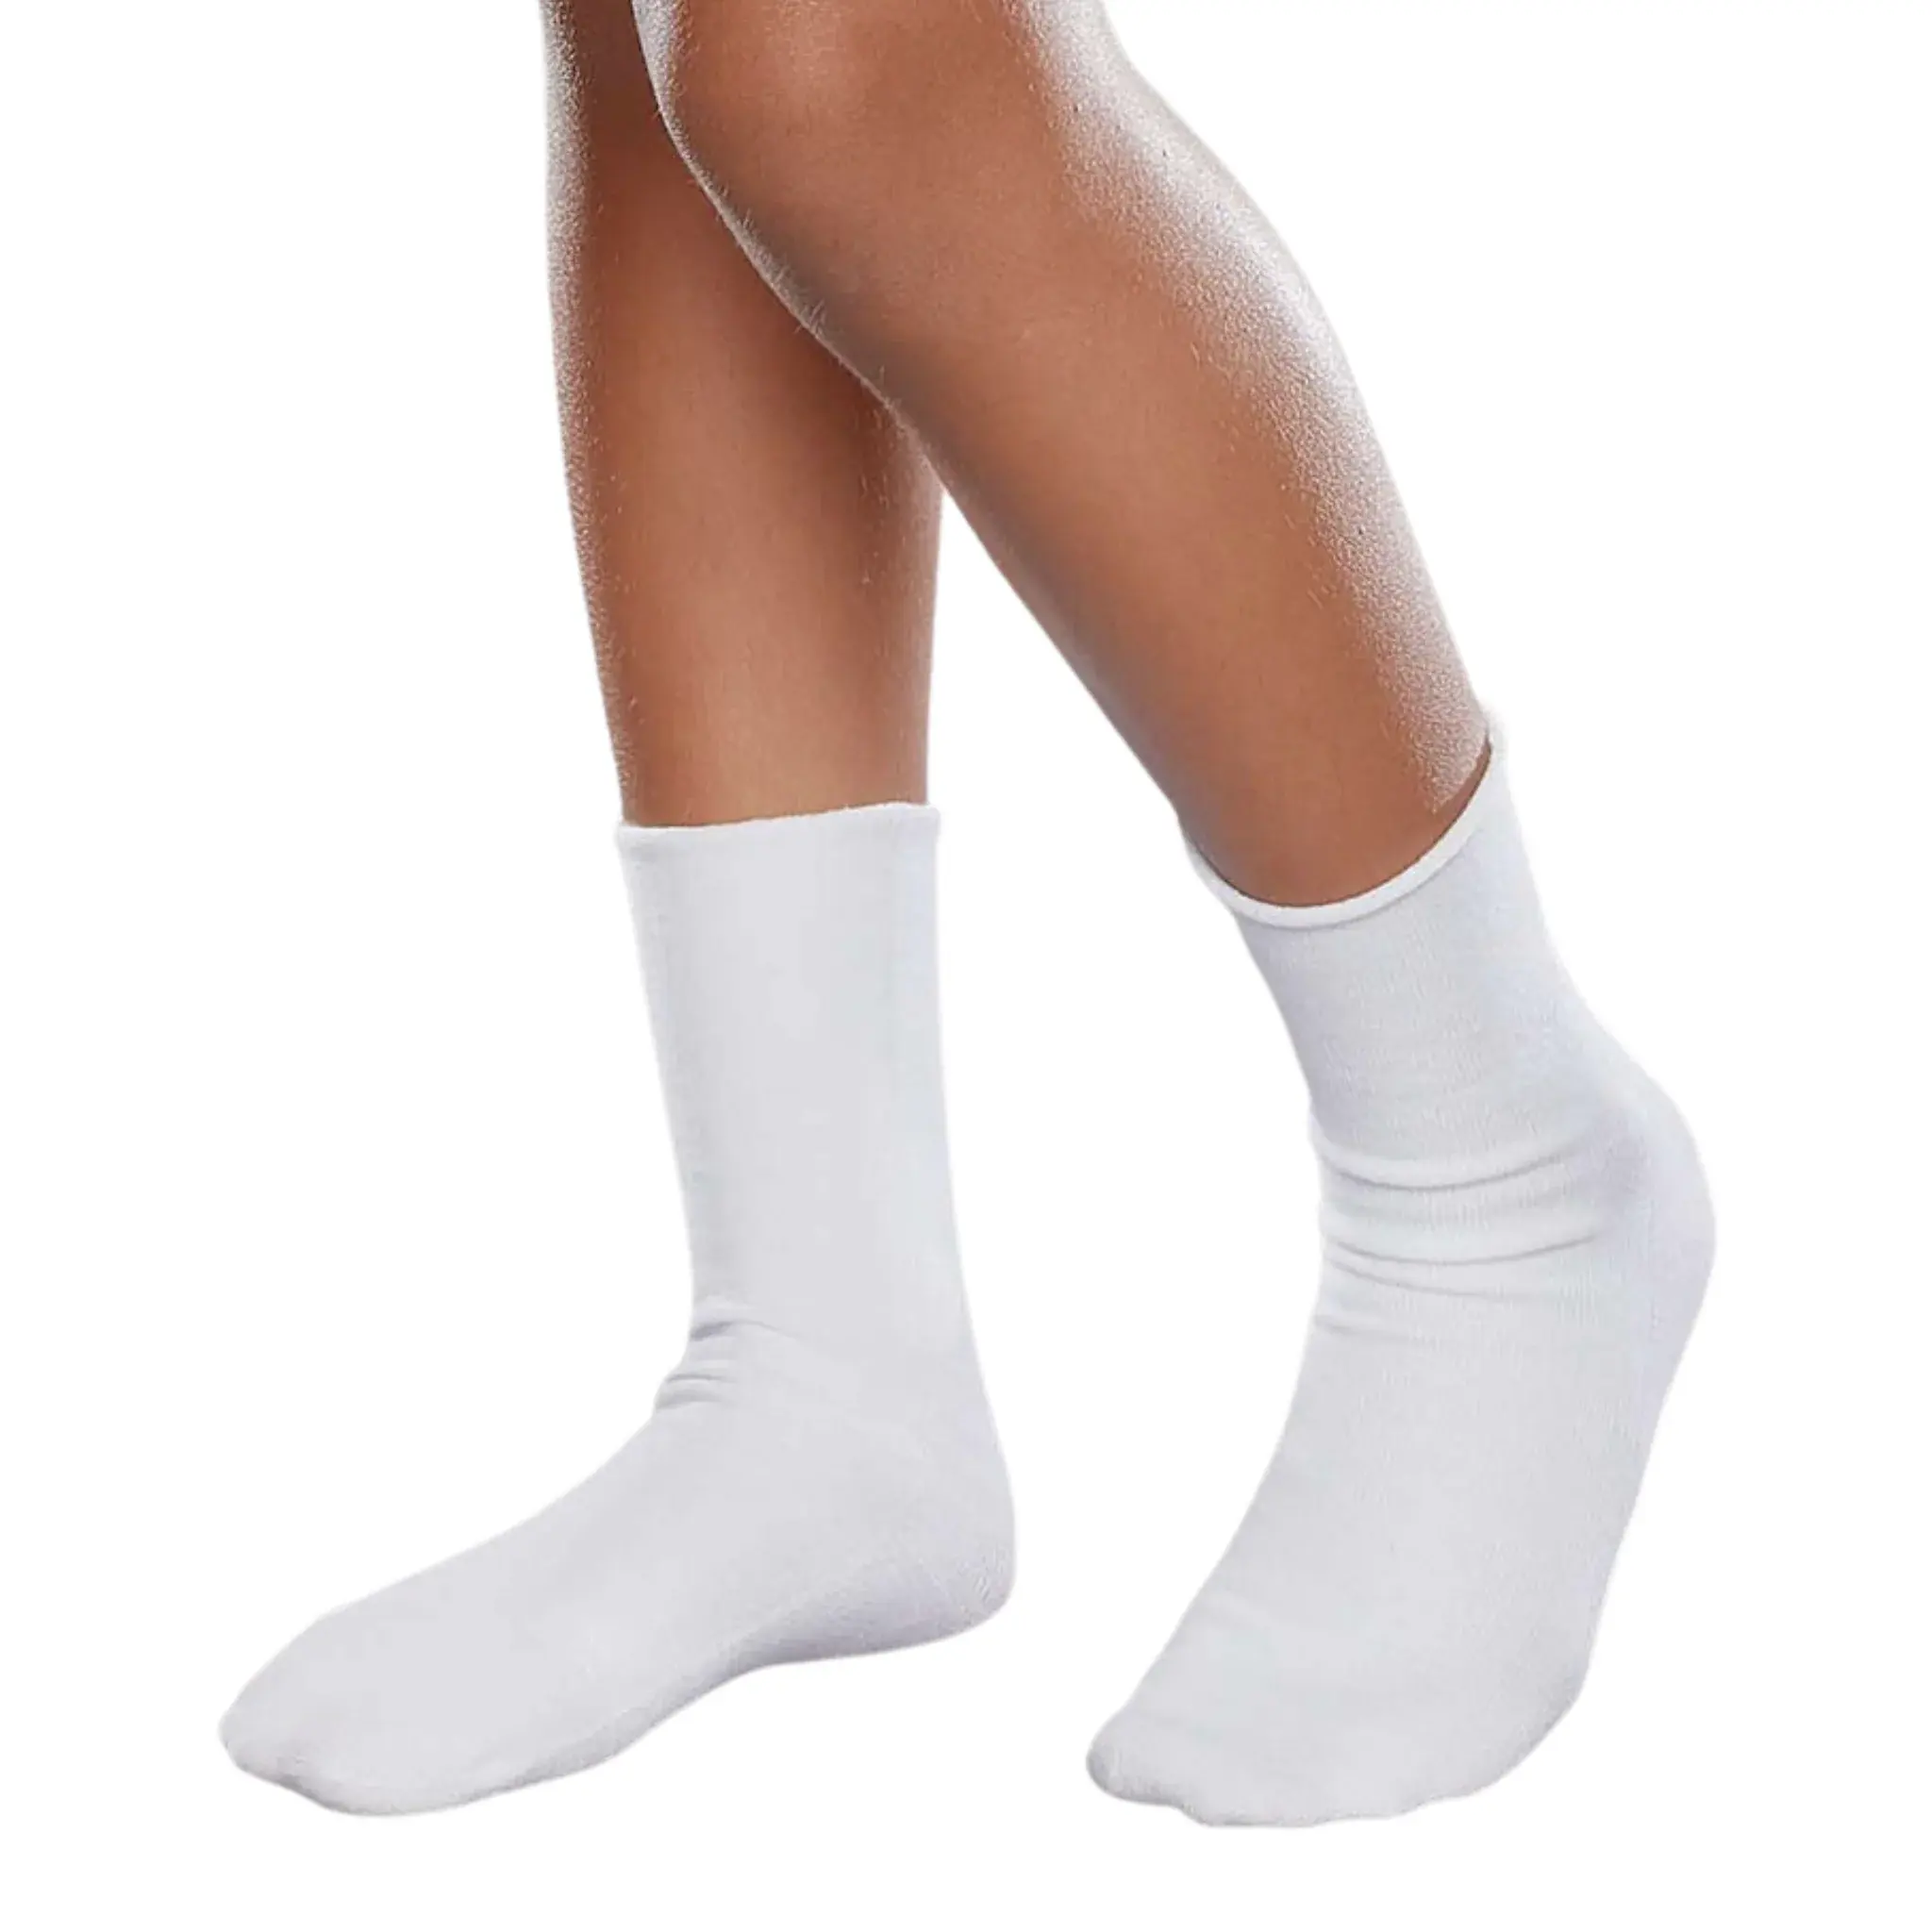 Best Premium Quality Cotton Socks Sold by Indian Manufacturer and Exporter Available at Affordable Price